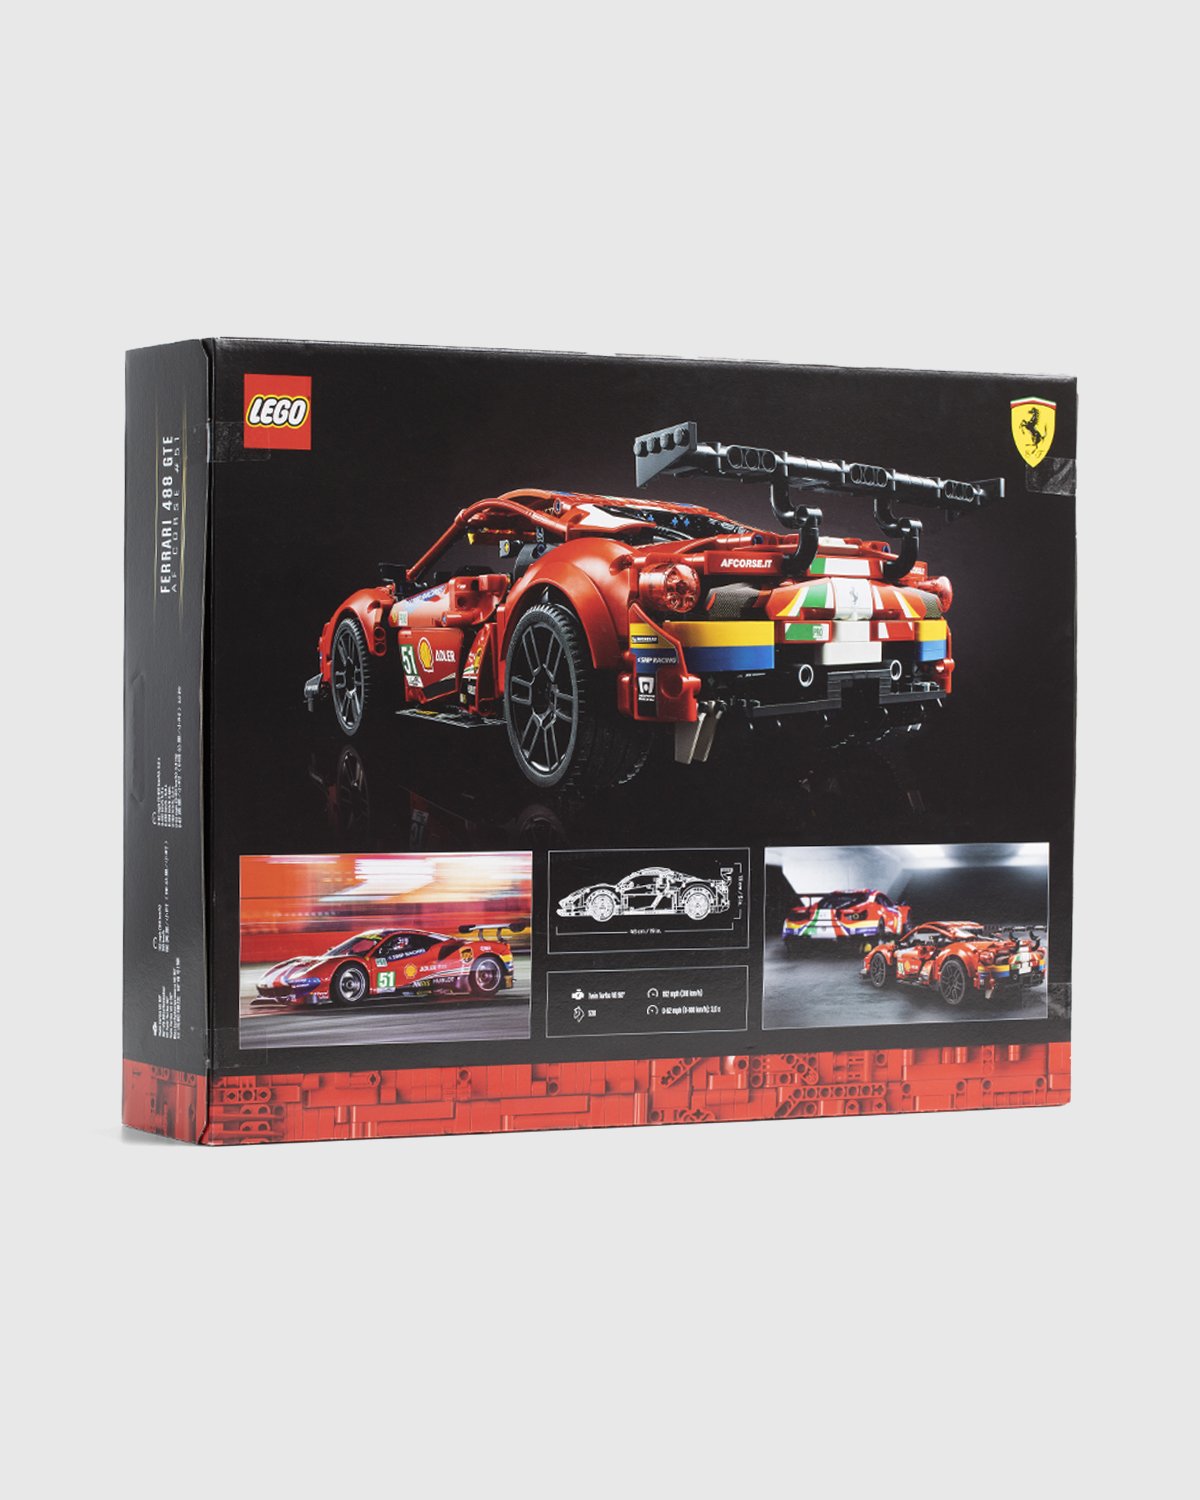 Lego - Technic Ferrari 488 GTE AF Corse 51 Red - Lifestyle - Red - Image 4